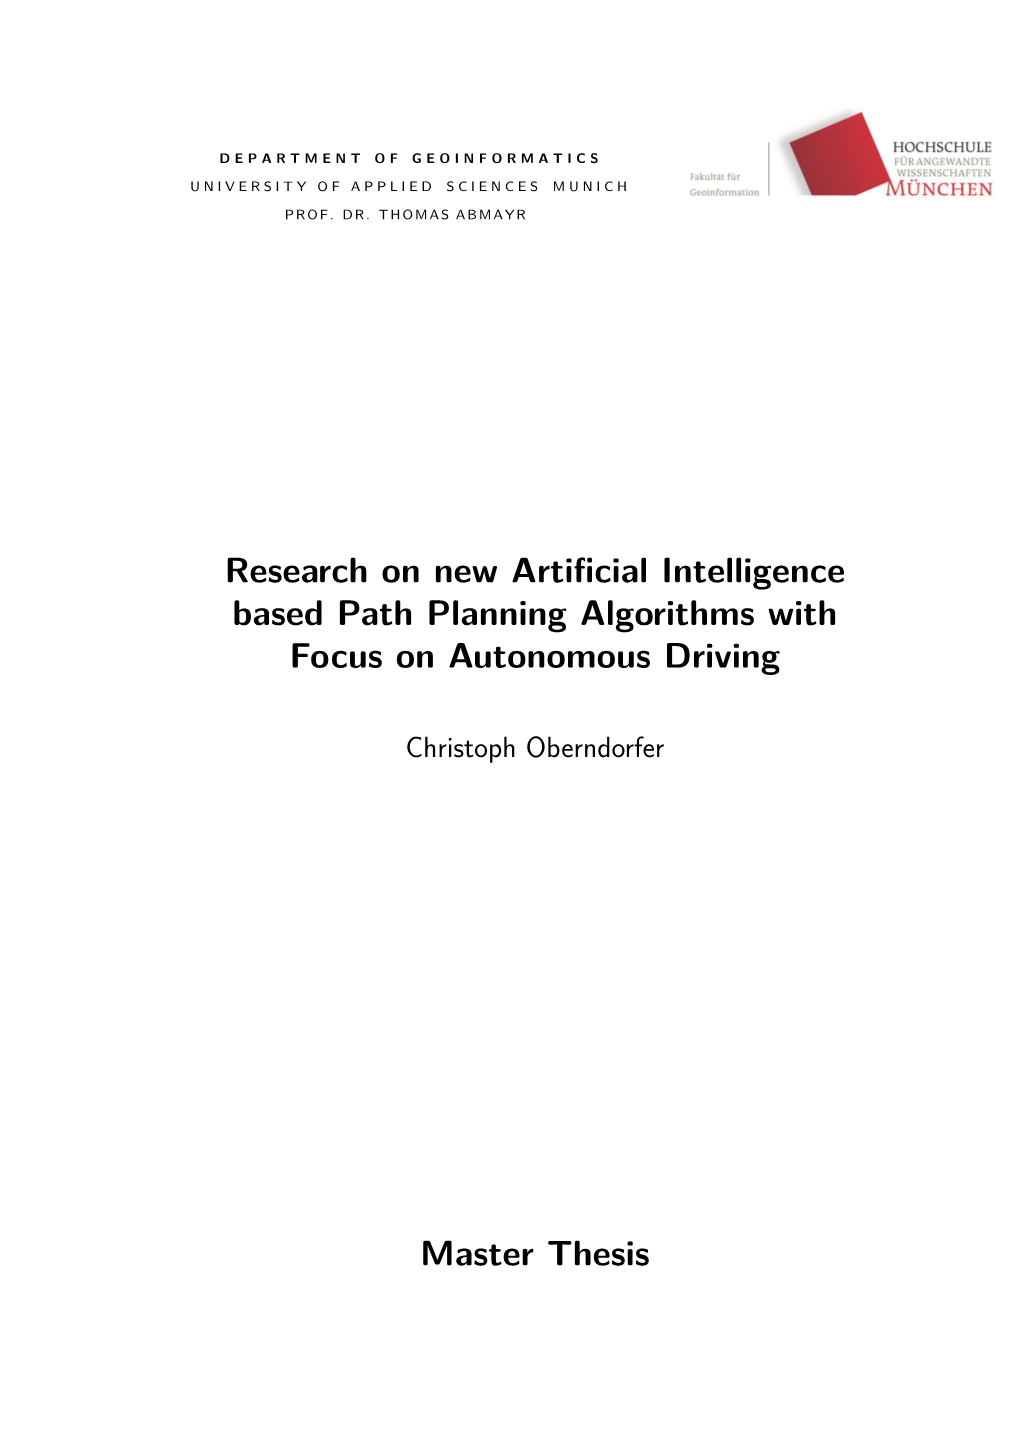 Research on New Artificial Intelligence Based Path Planning Algorithms with Focus on Autonomous Driving